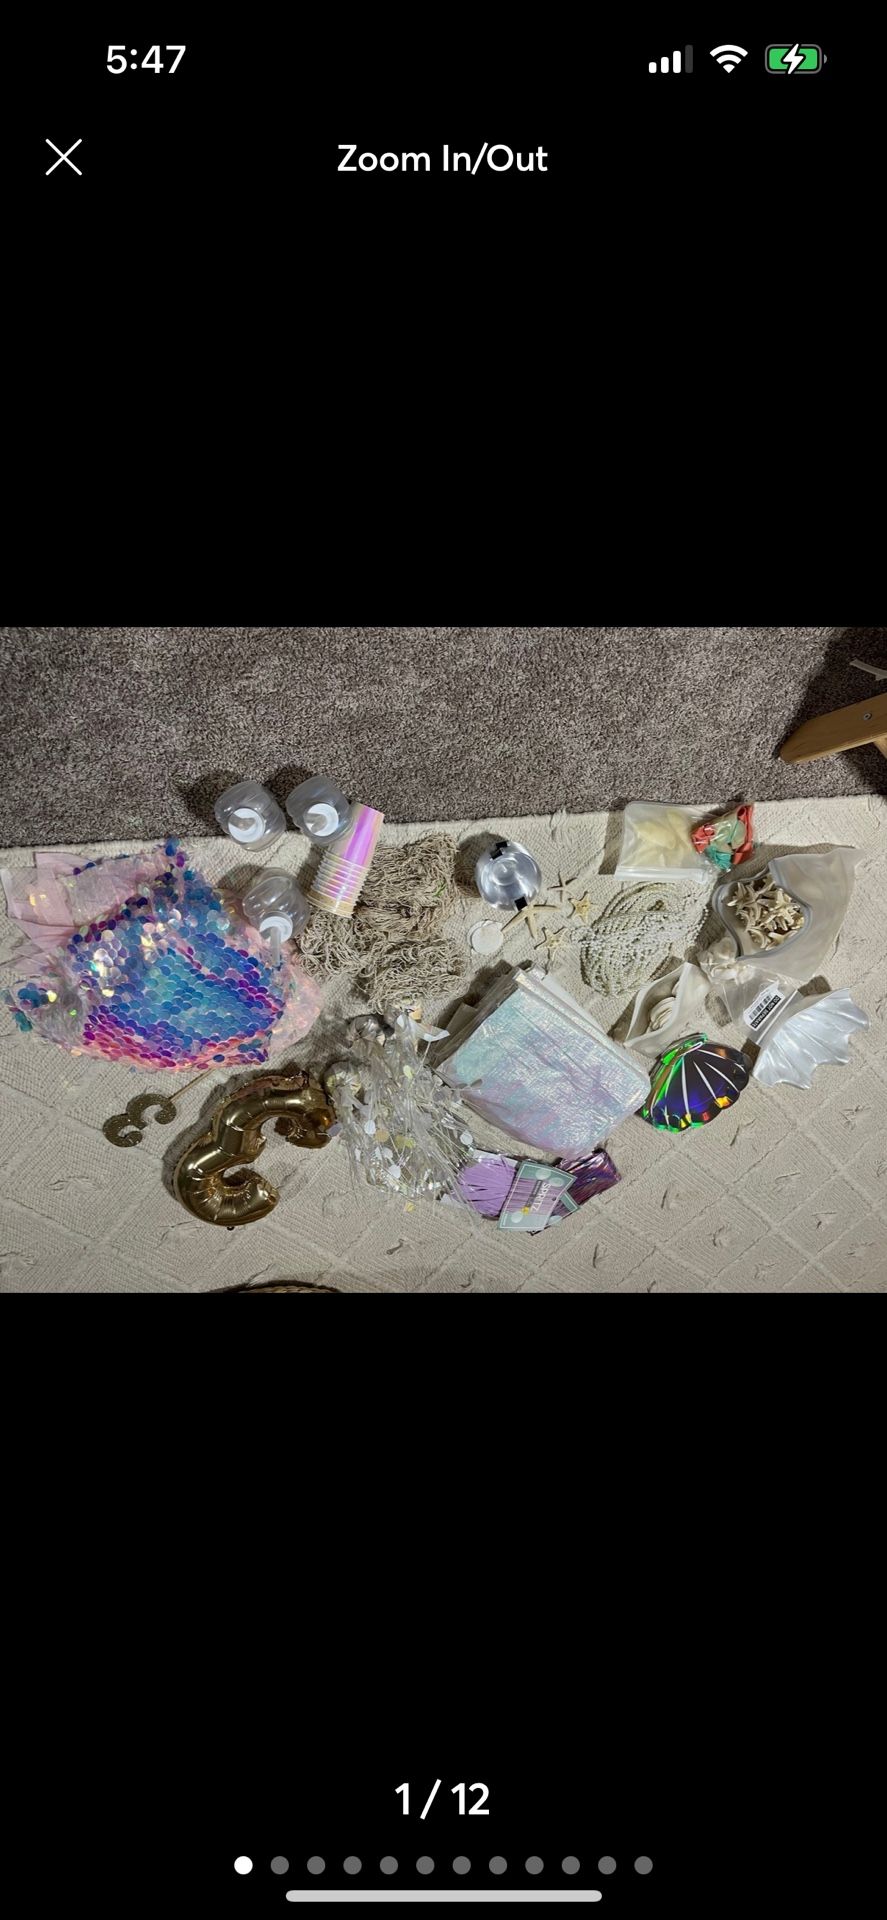 Lot of Mermaid/under sea party decorations/supplies